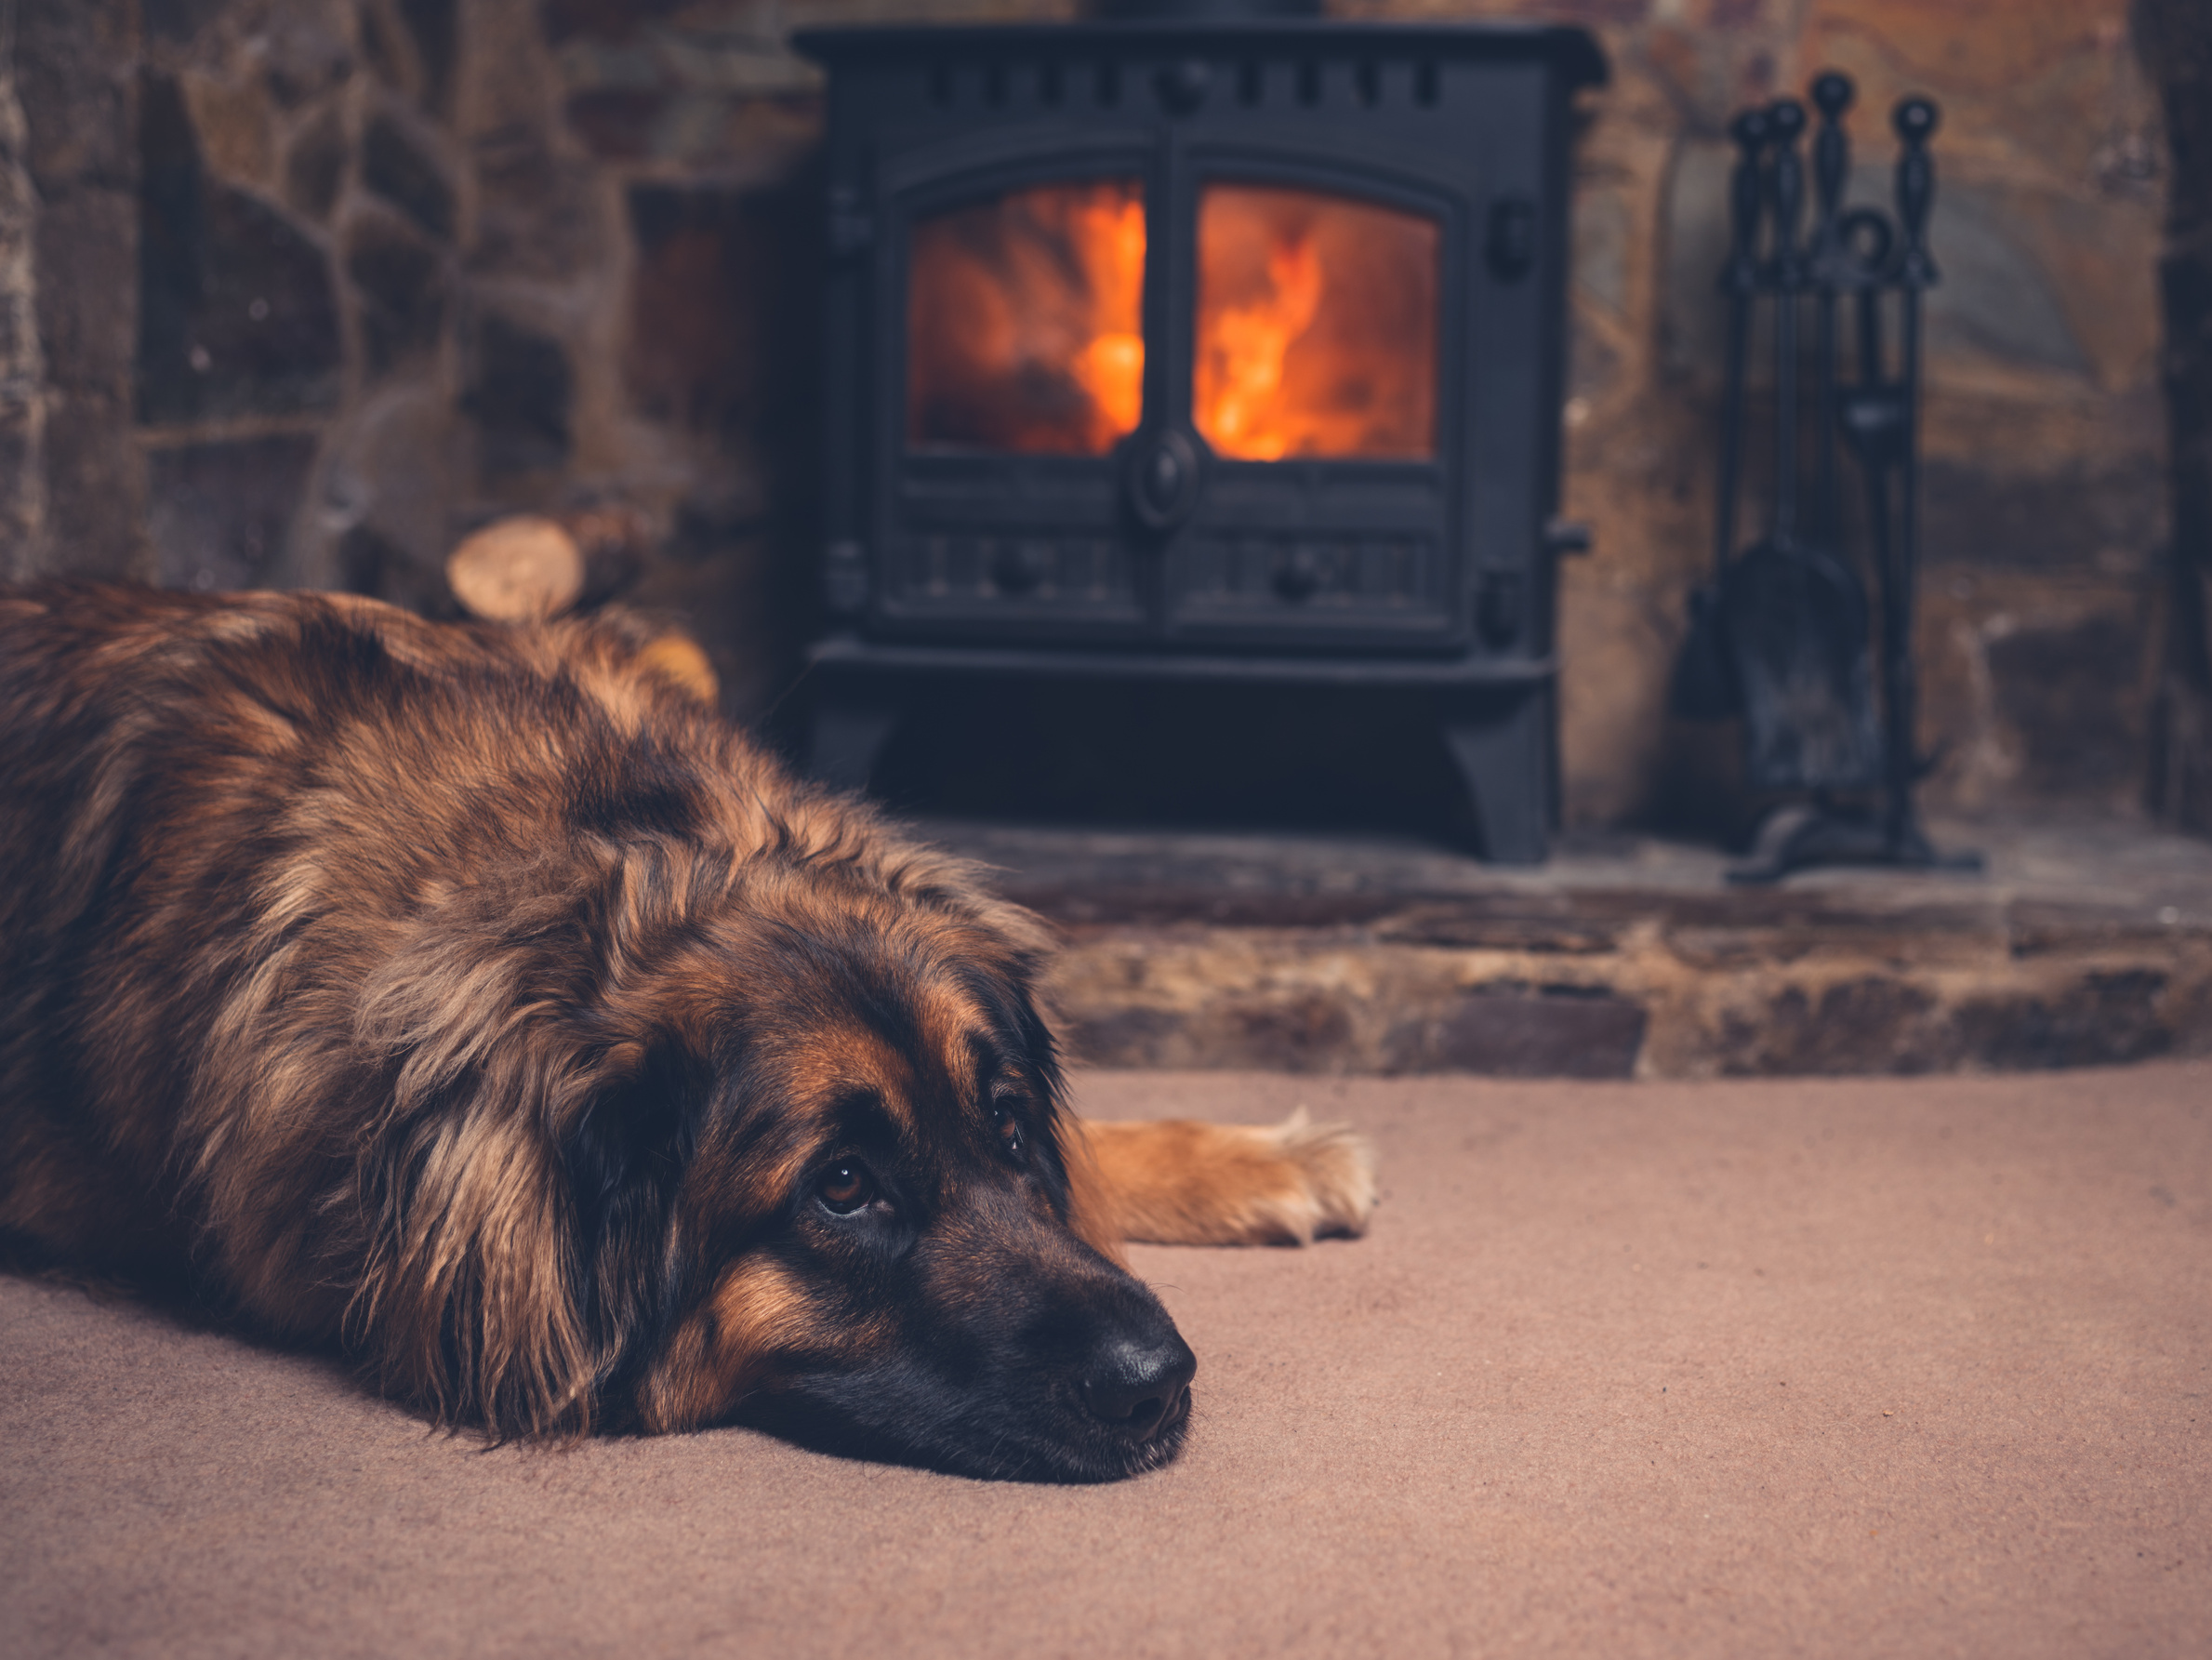 Dog Relaxing by the Fire